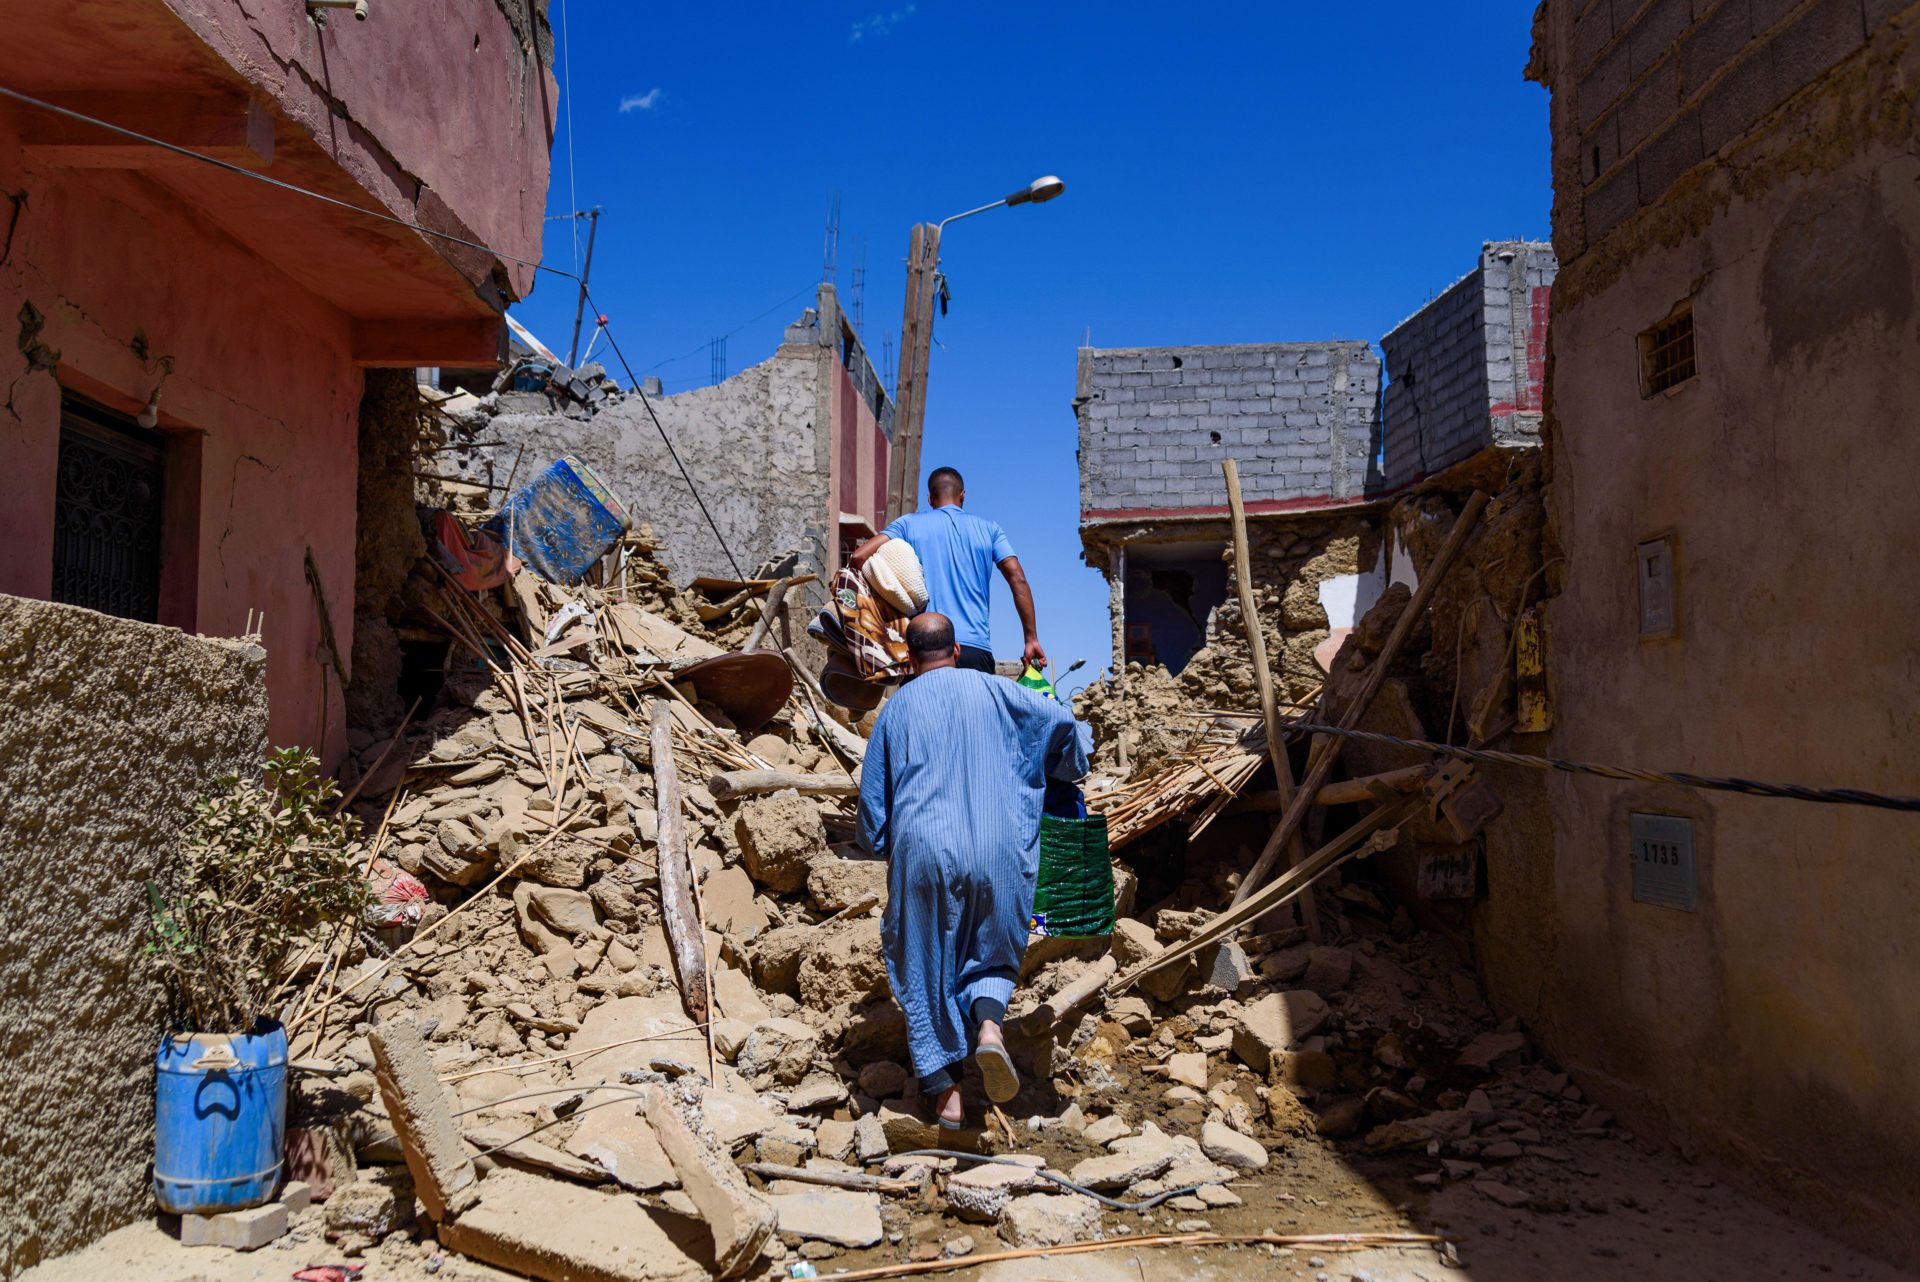 A man walking among debris from destroyed houses in the aftermath of the earthquake. 